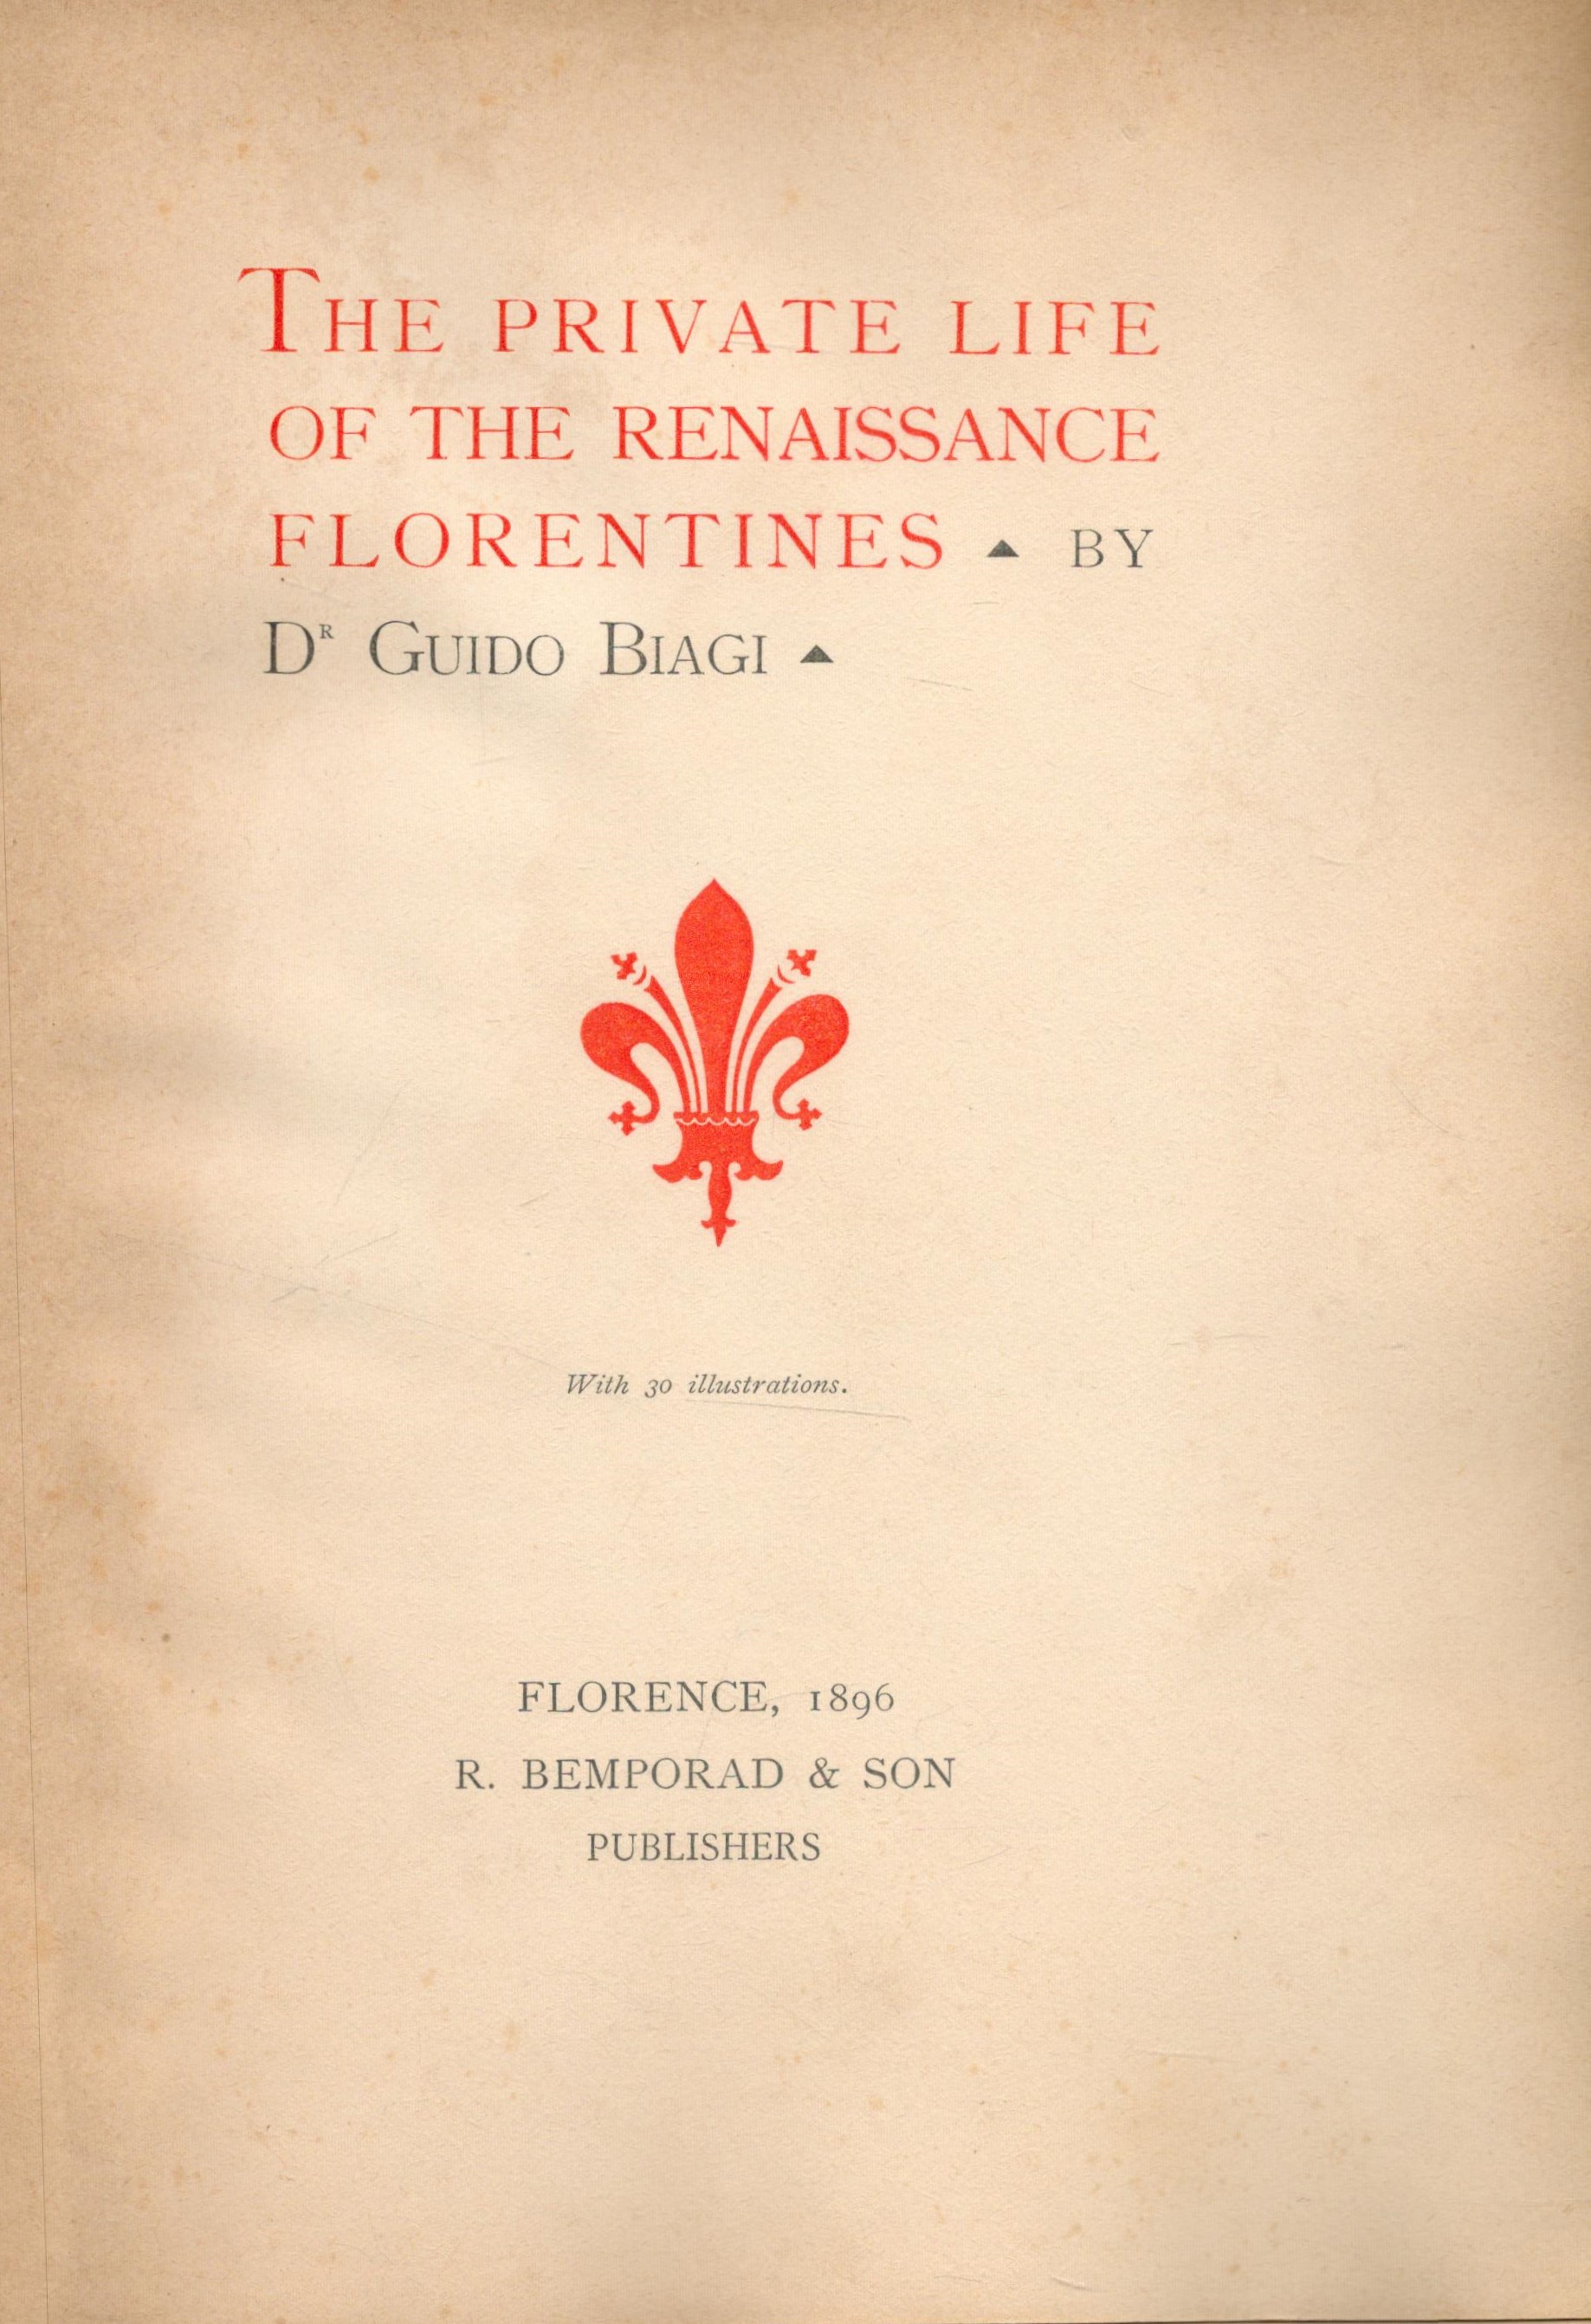 Dr Guido Biagi The Private Life of The Renaissance Florentines. Published by R. Bemporad and Don, - Image 2 of 2